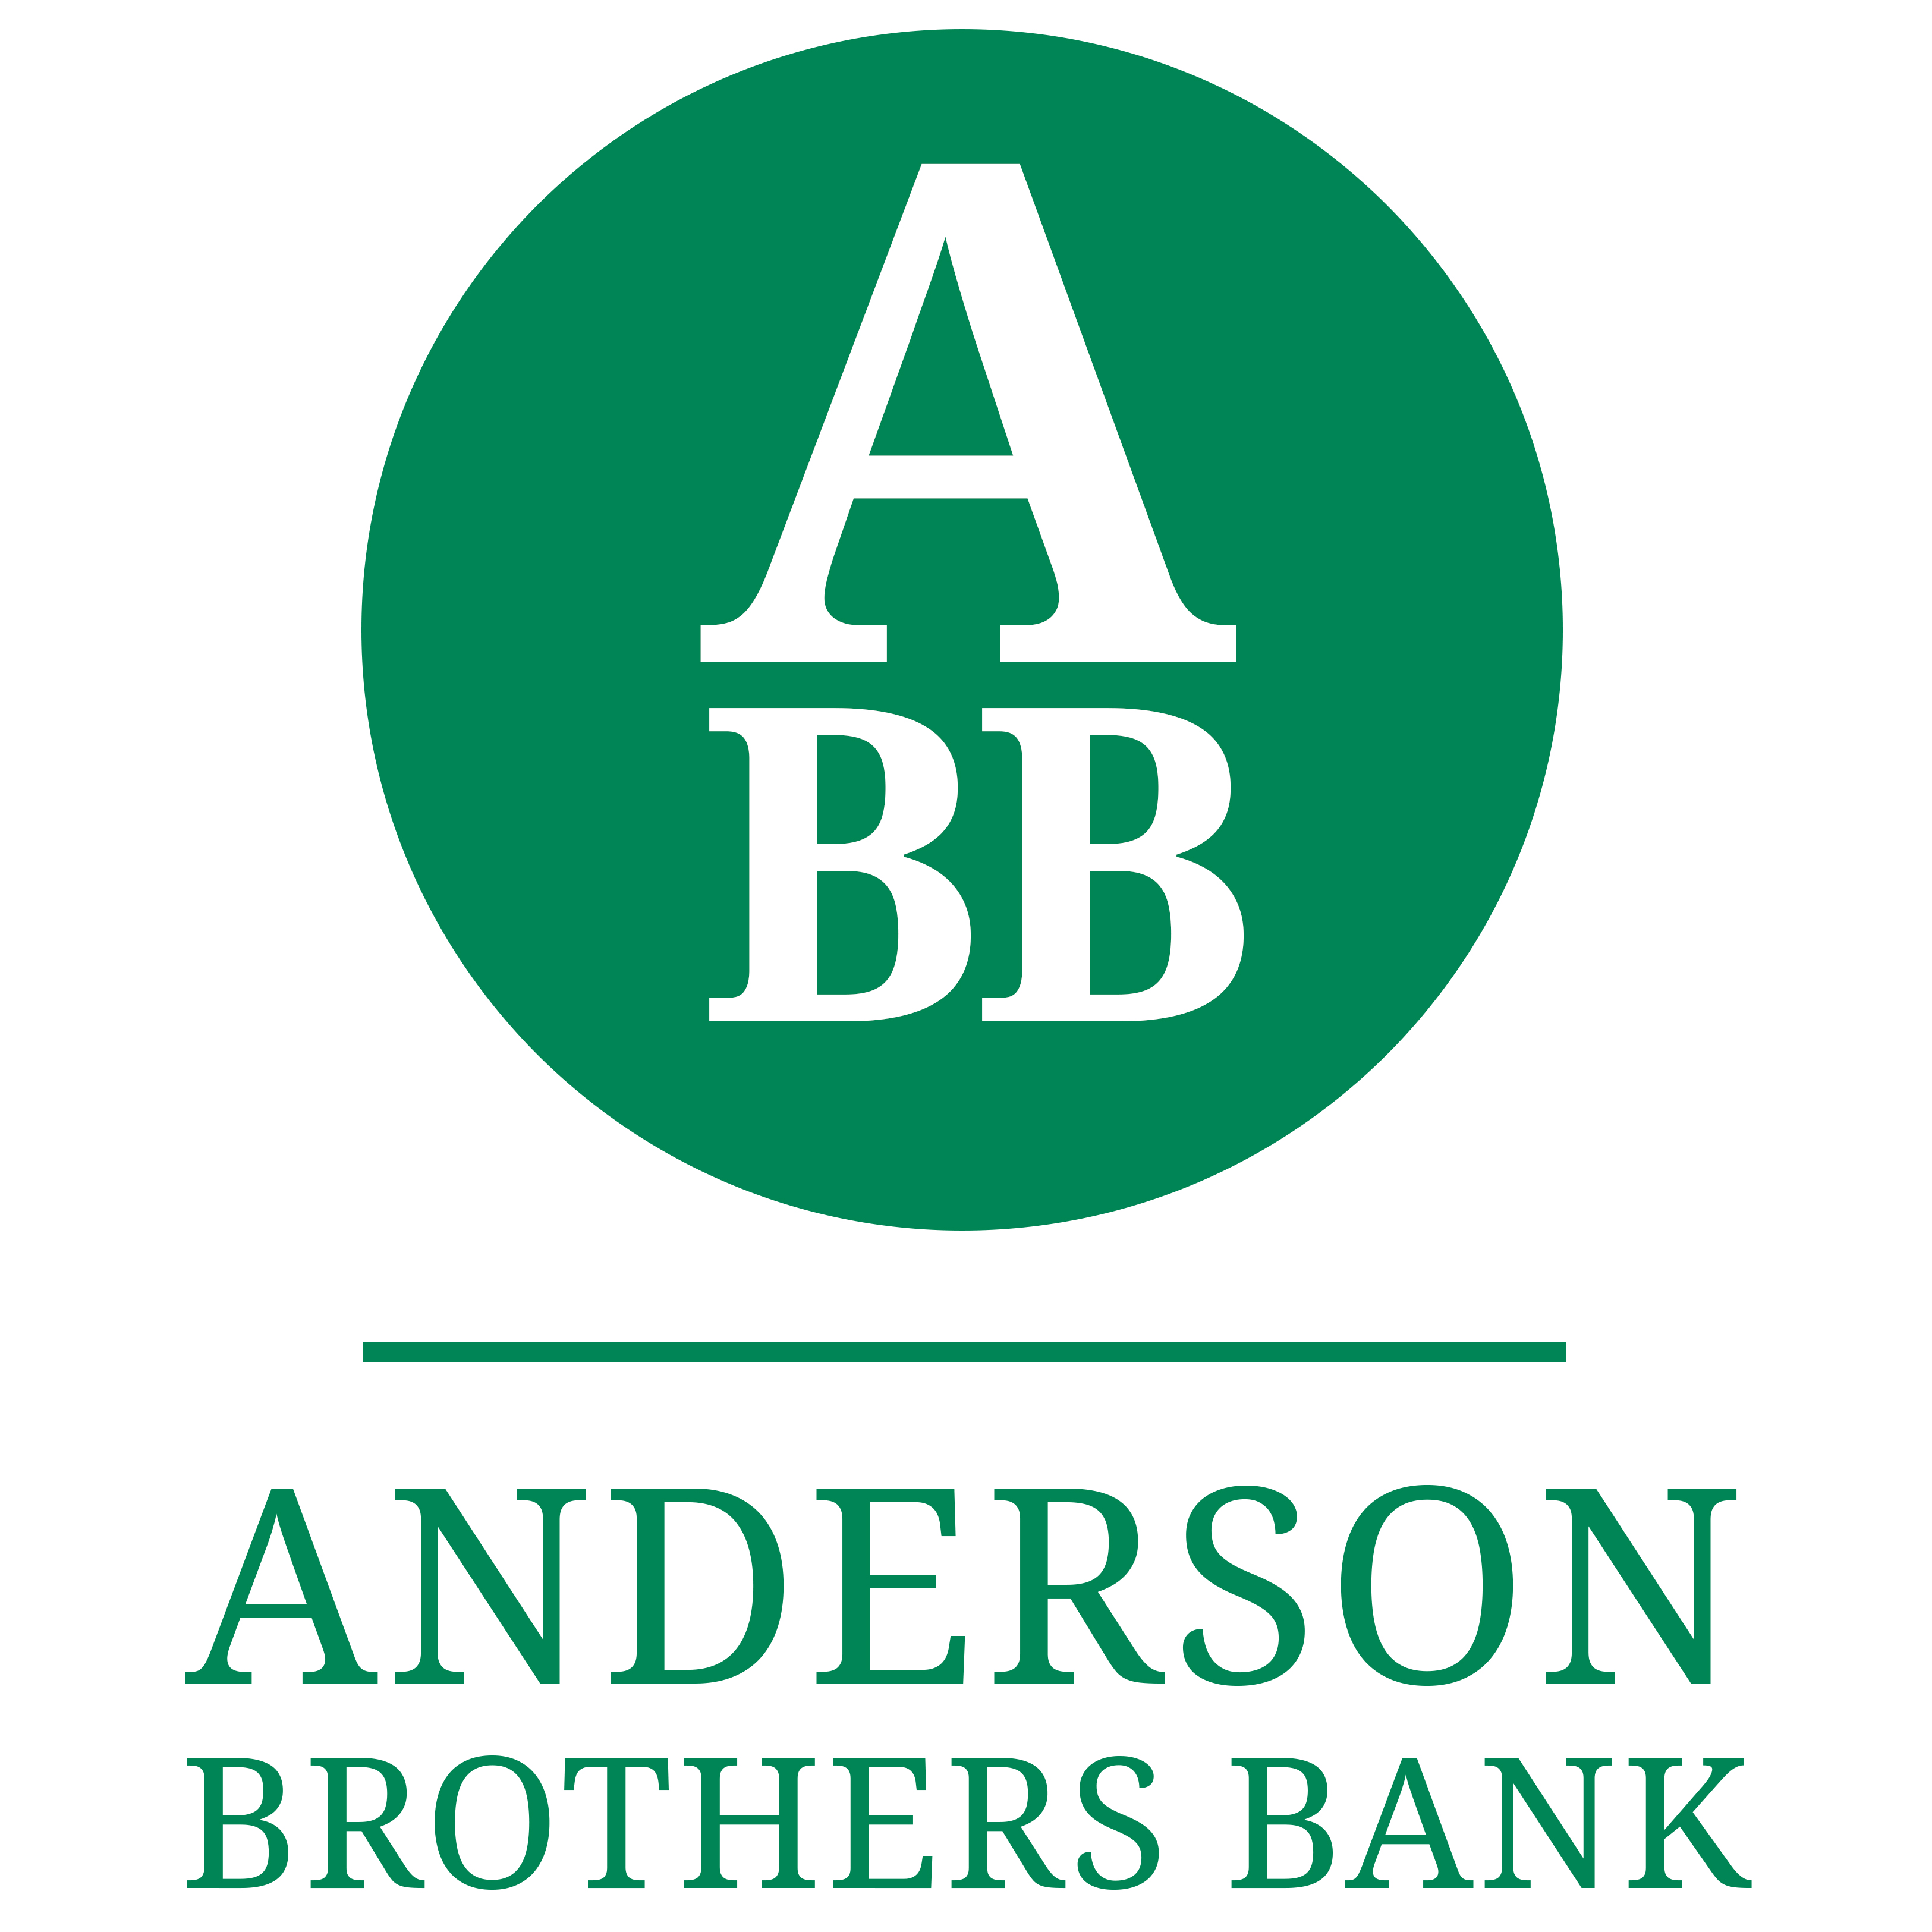 Anderson Brothers Bank logo